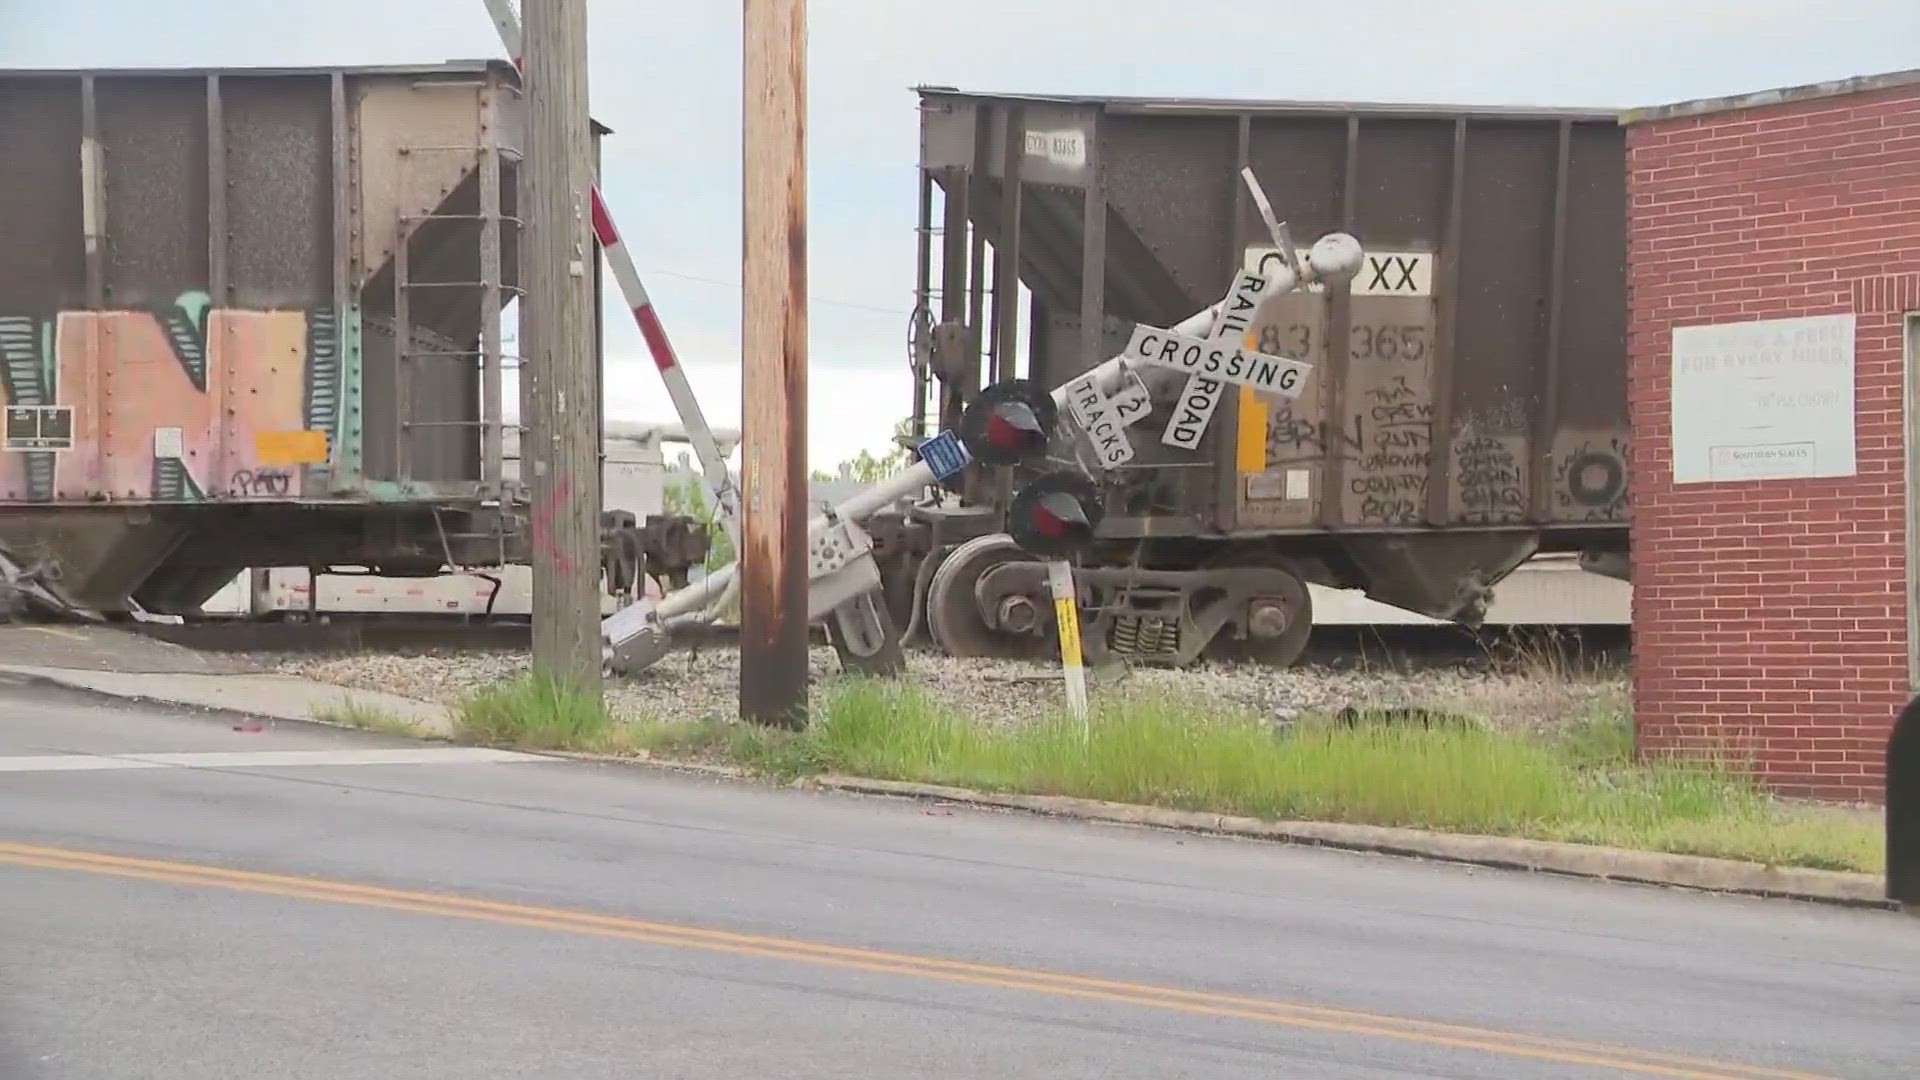 The Medina County Sheriff's Office tells 3News there has been a train derailment along OH-301 in Spencer Township.